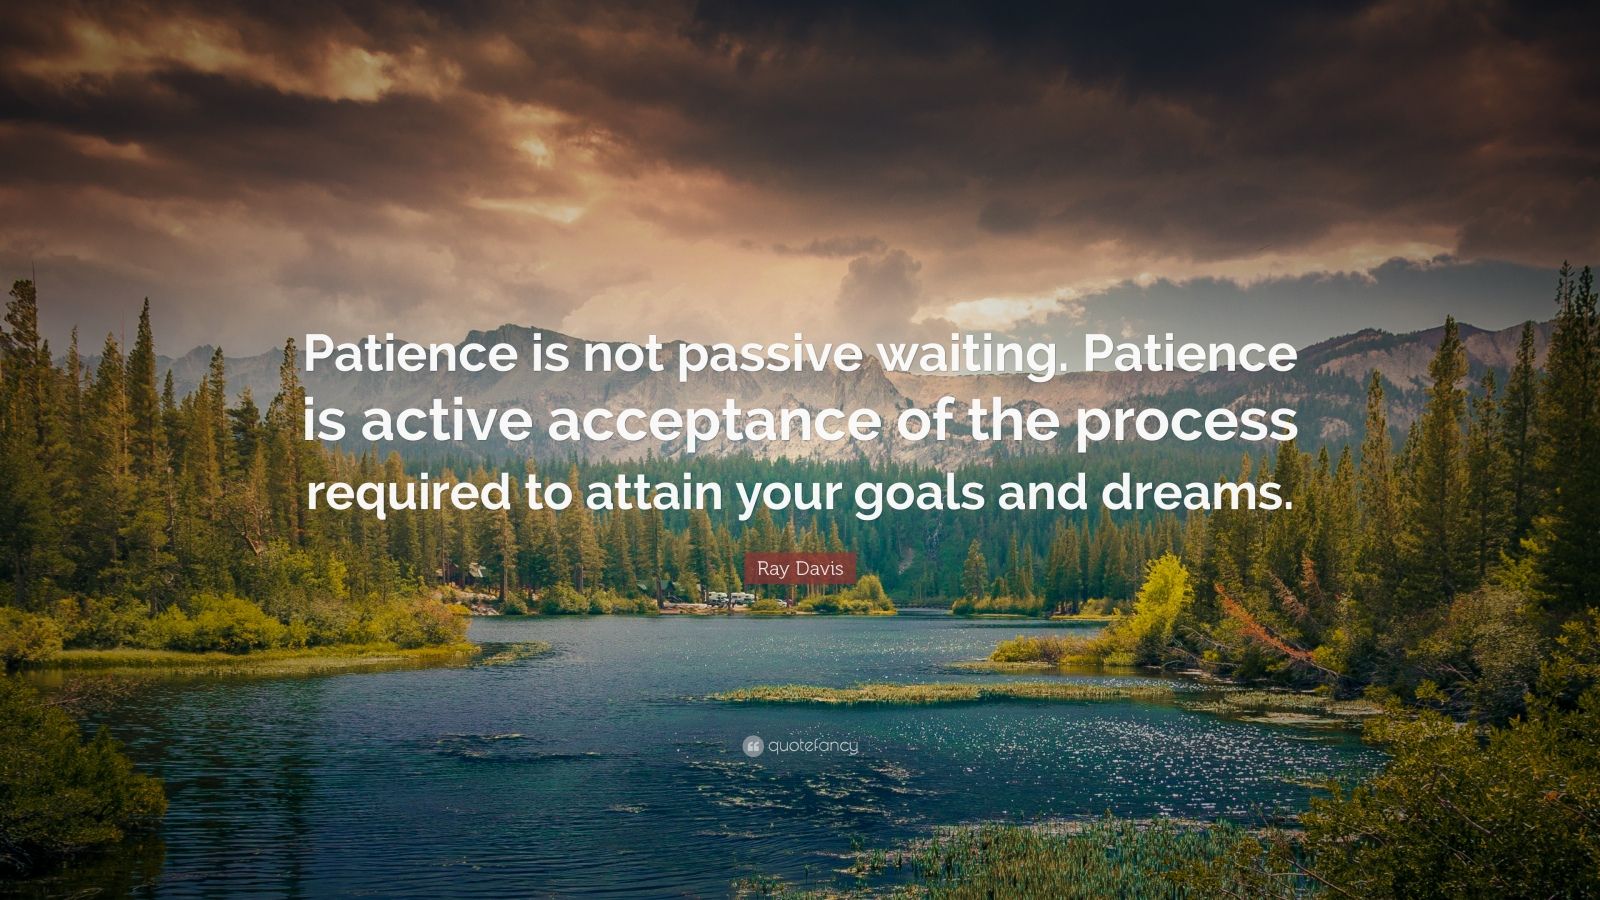 Ray Davis Quote: “Patience is not passive waiting. Patience is active